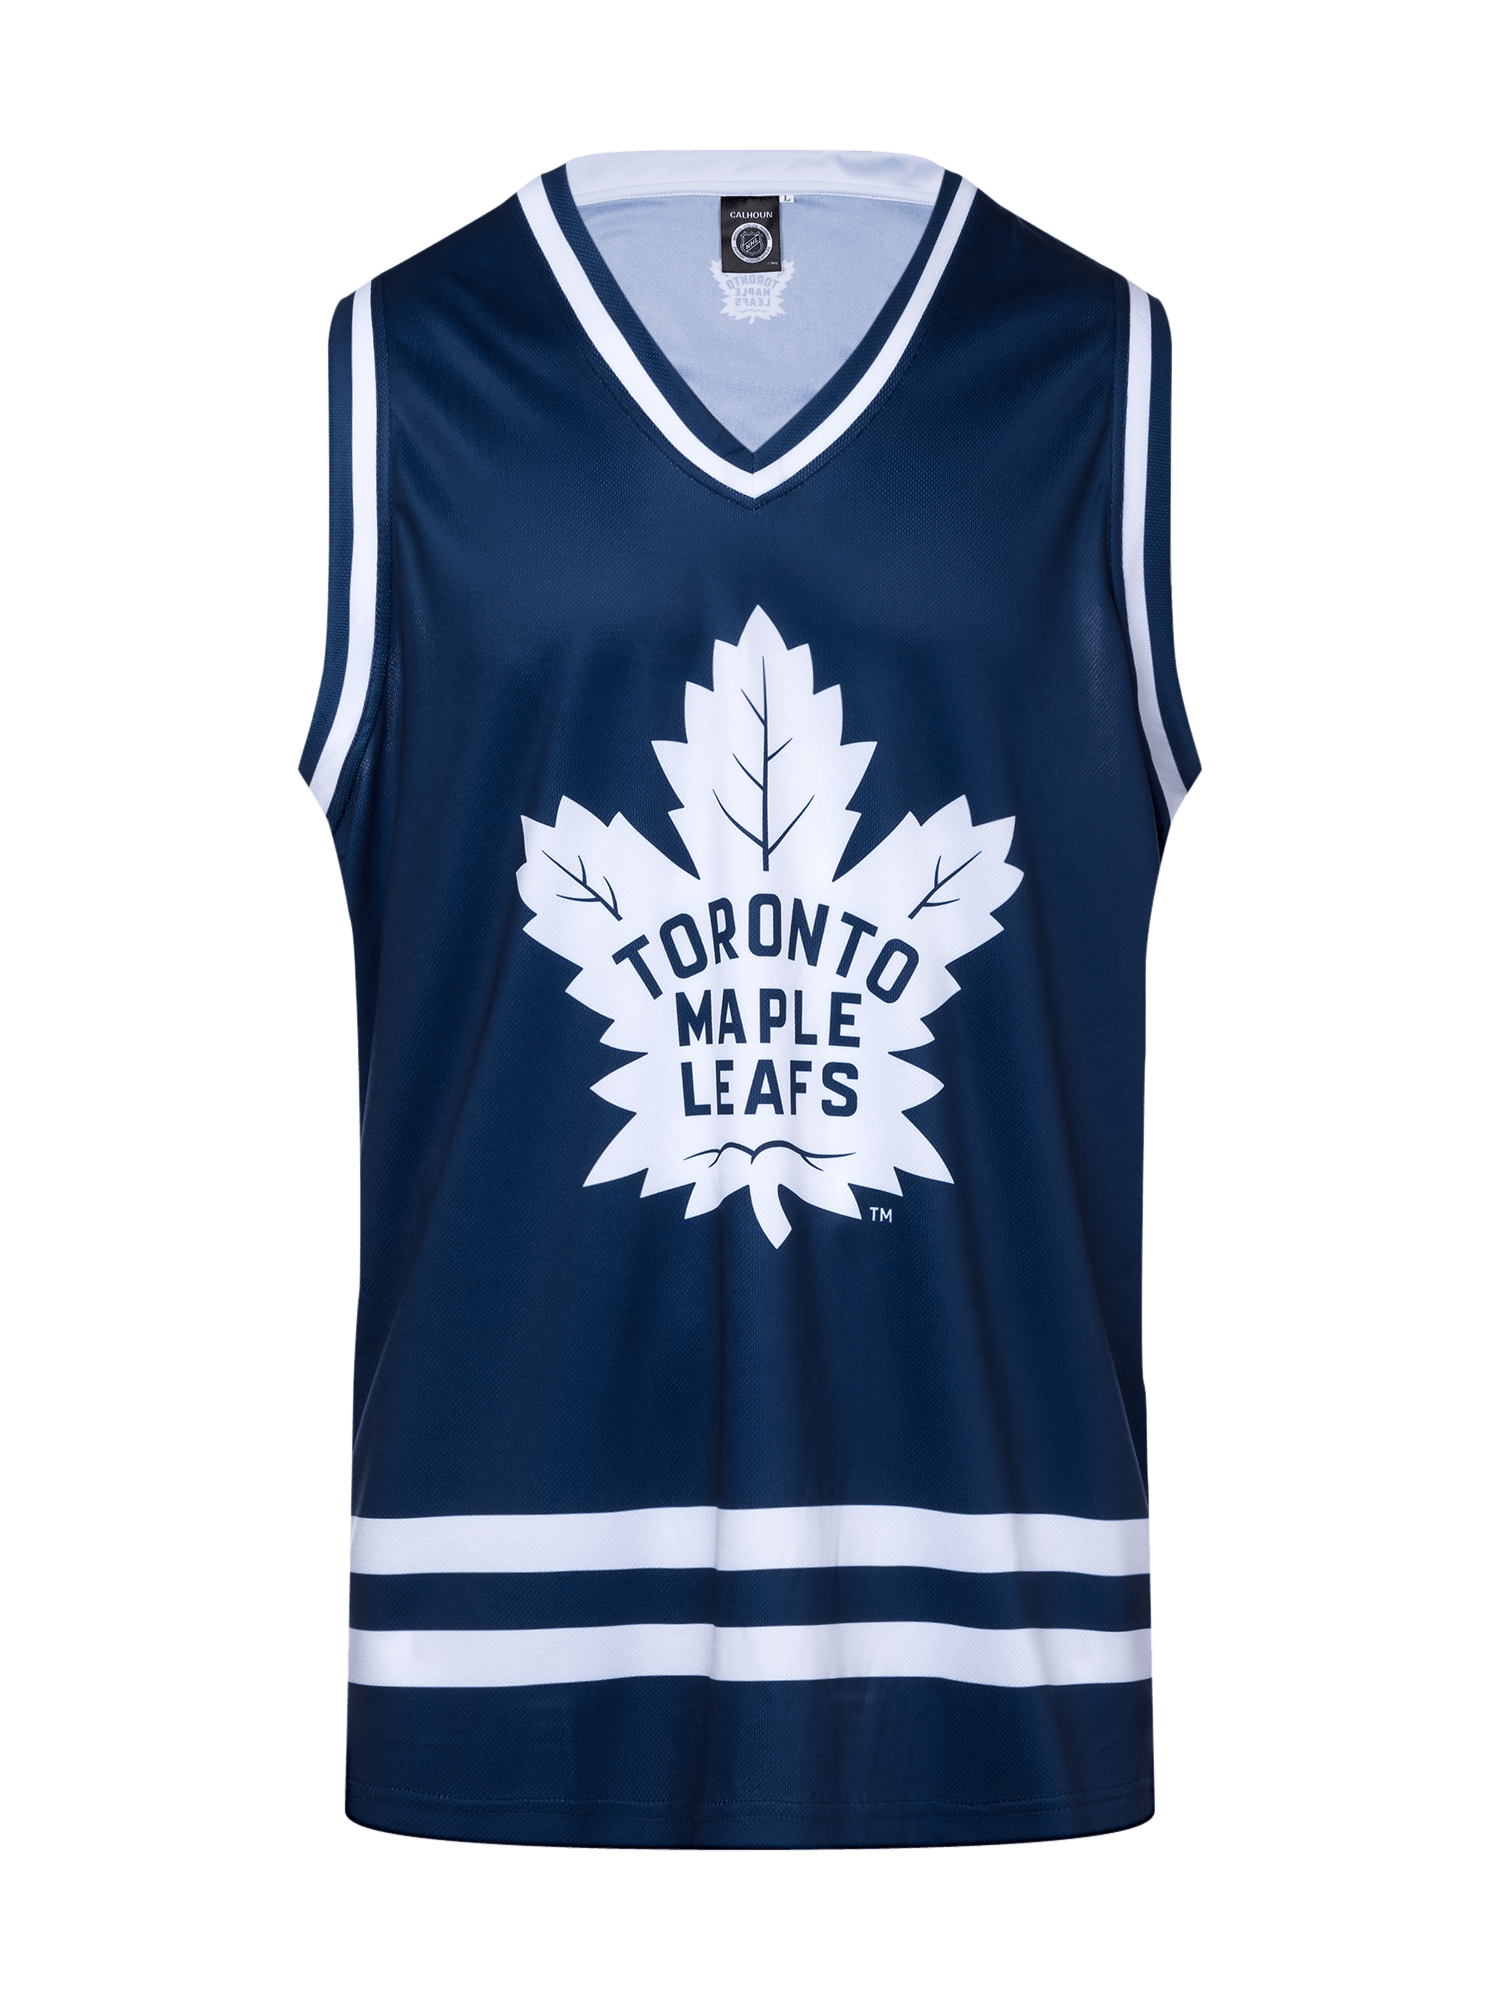 where to buy maple leafs jersey